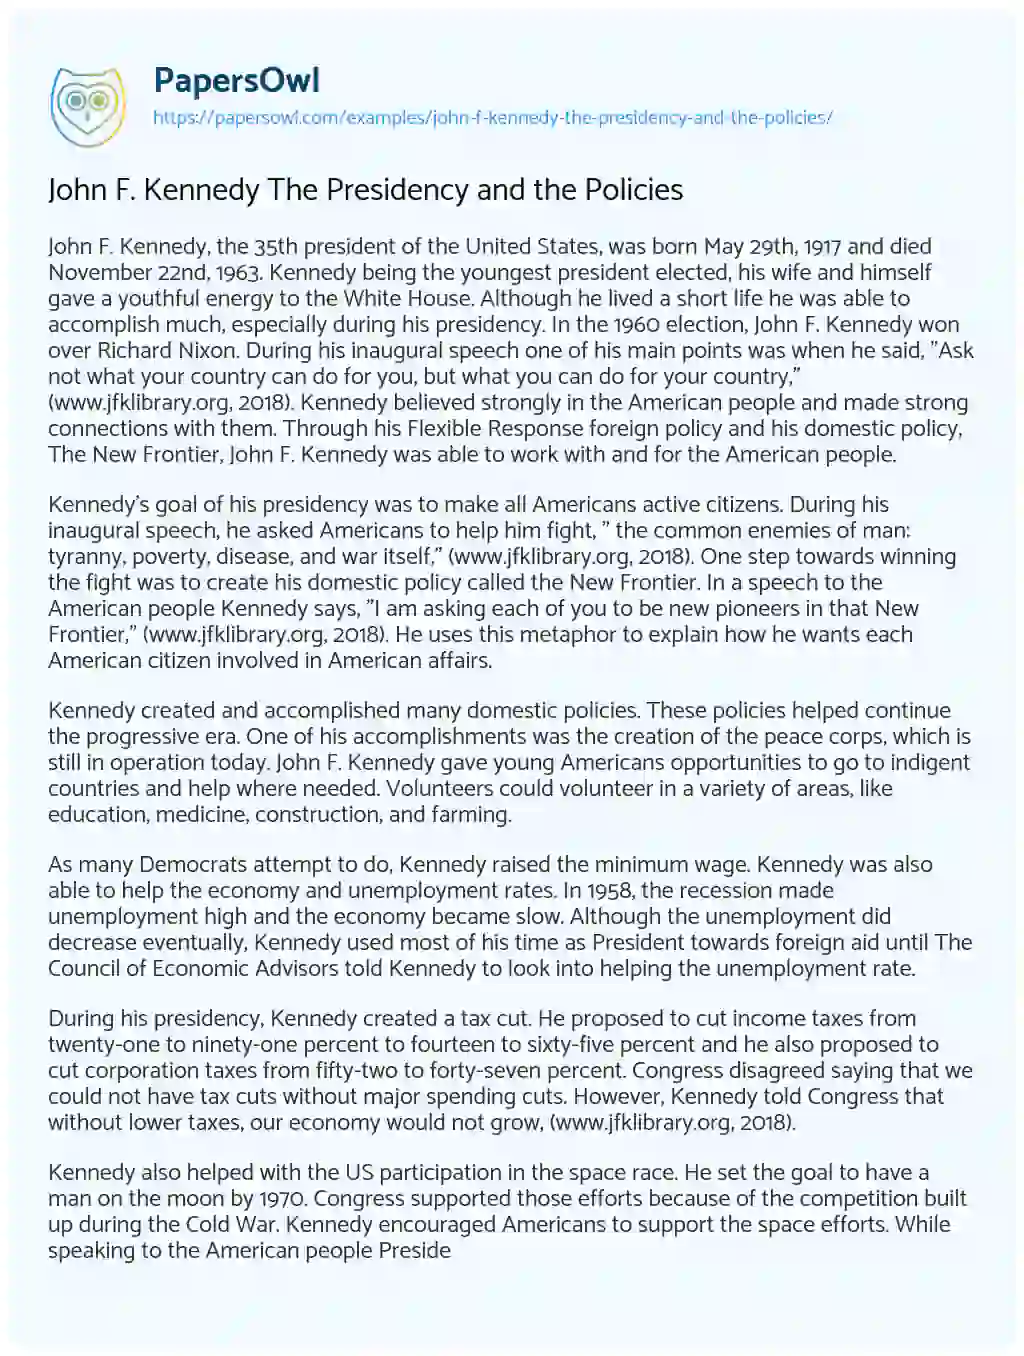 John F. Kennedy the Presidency and the Policies essay